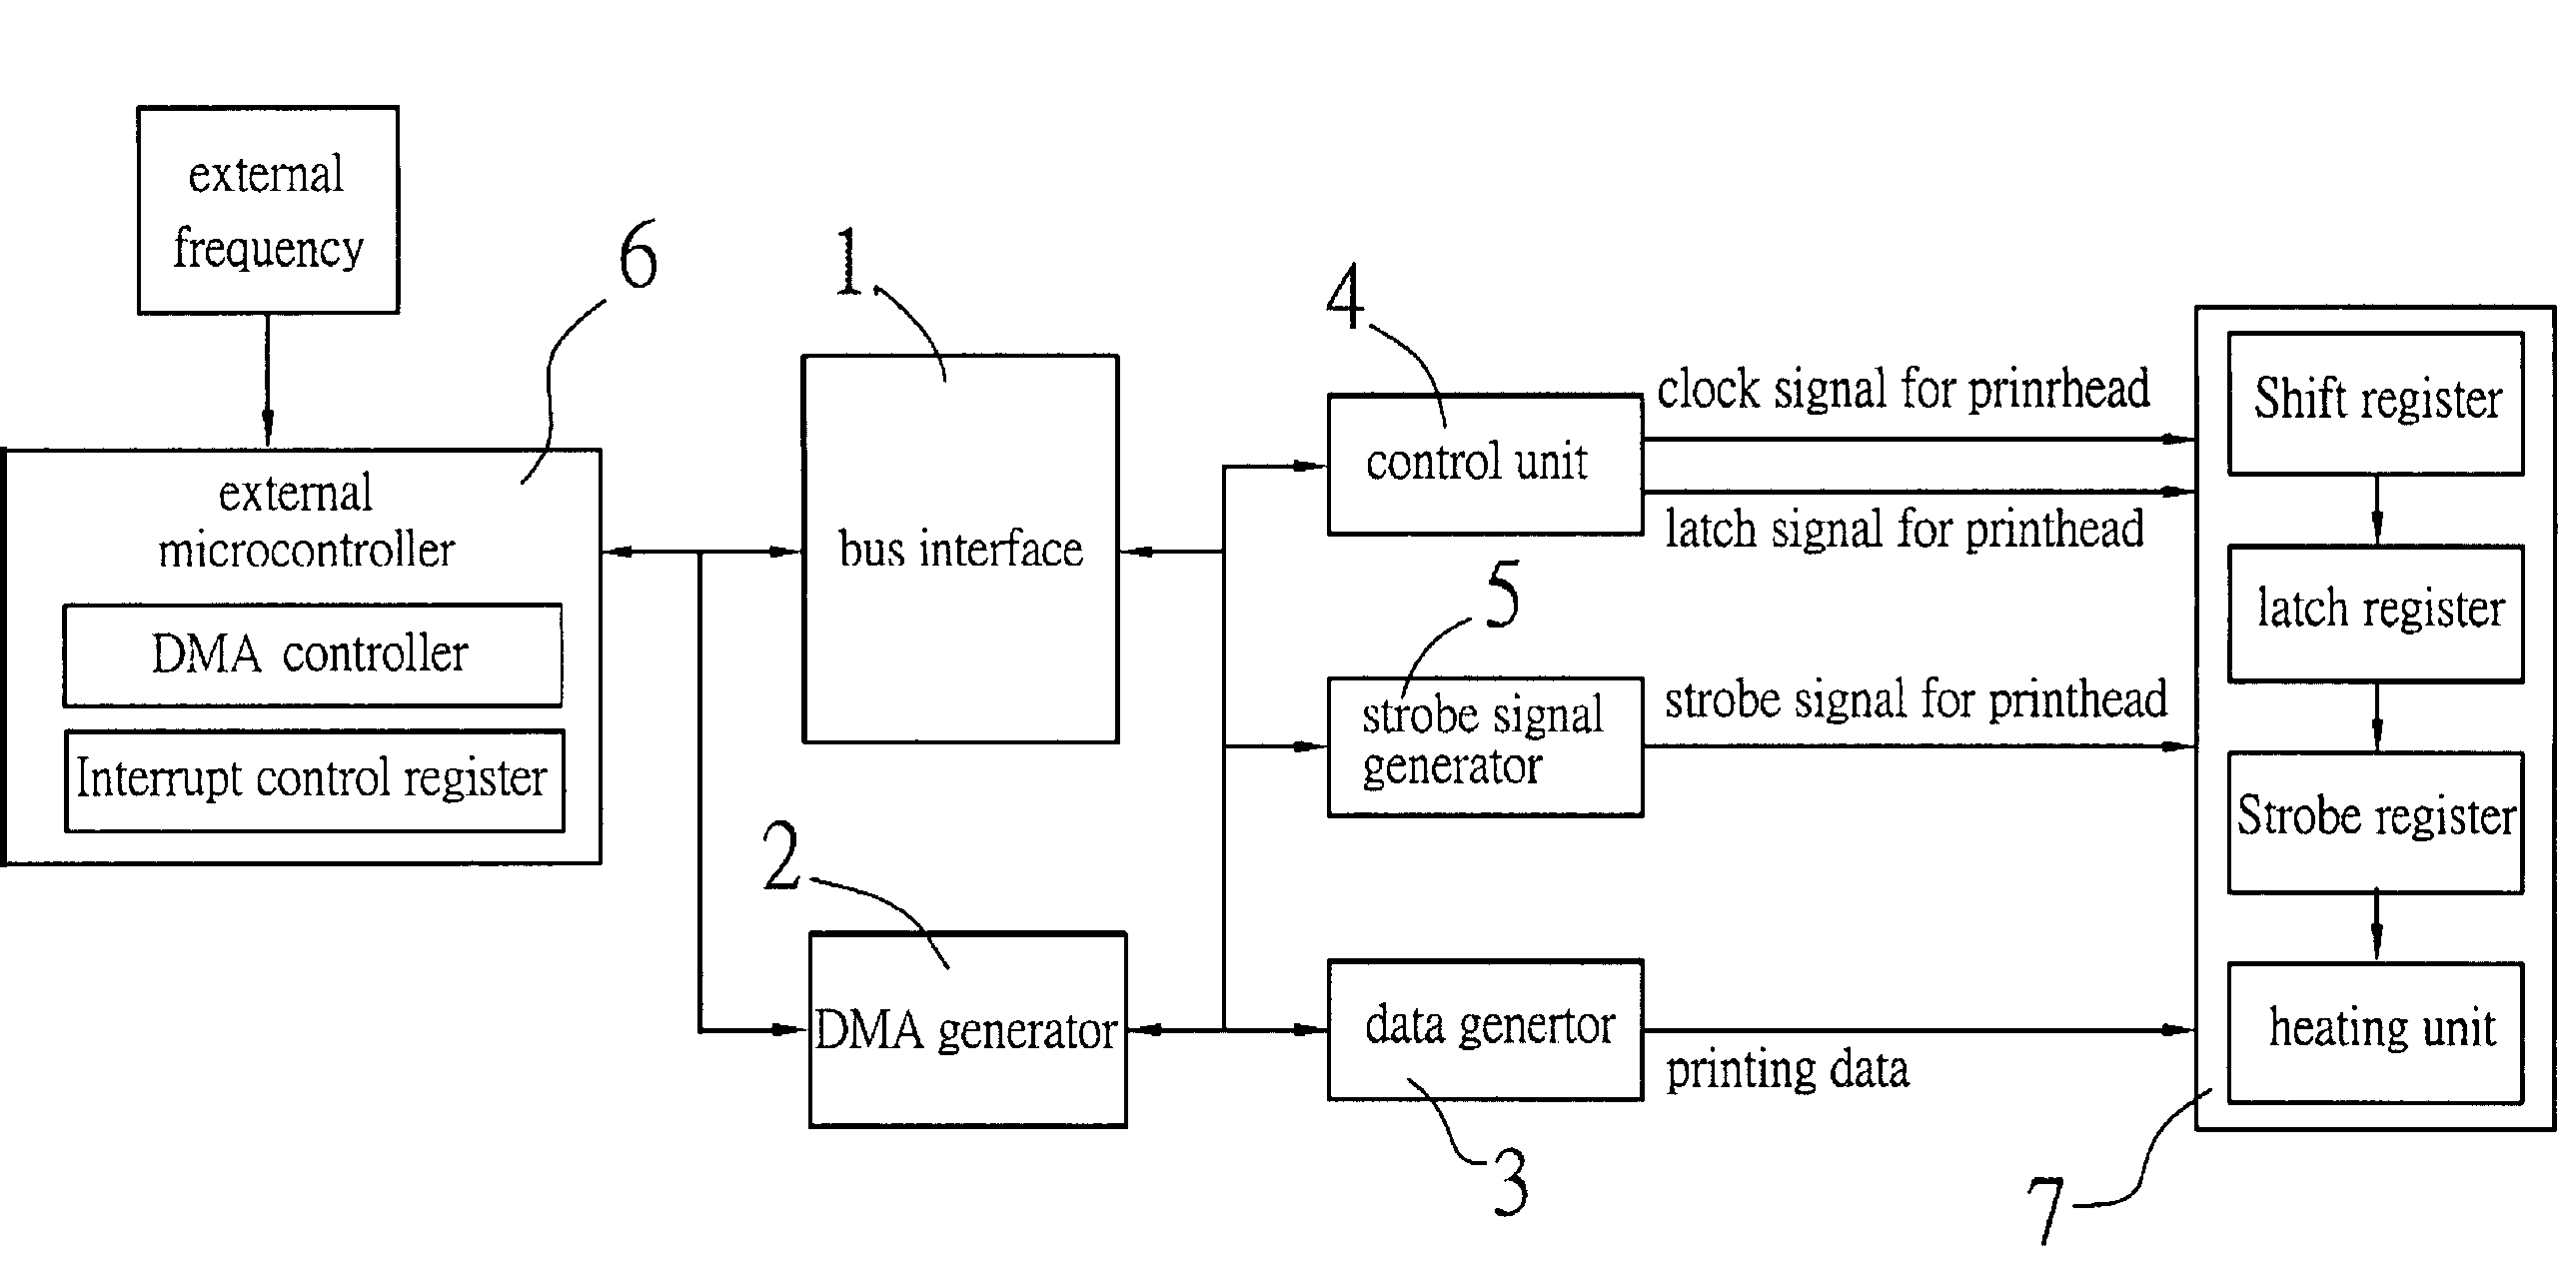 Apparatus and method for multichannel sequence transmission and control